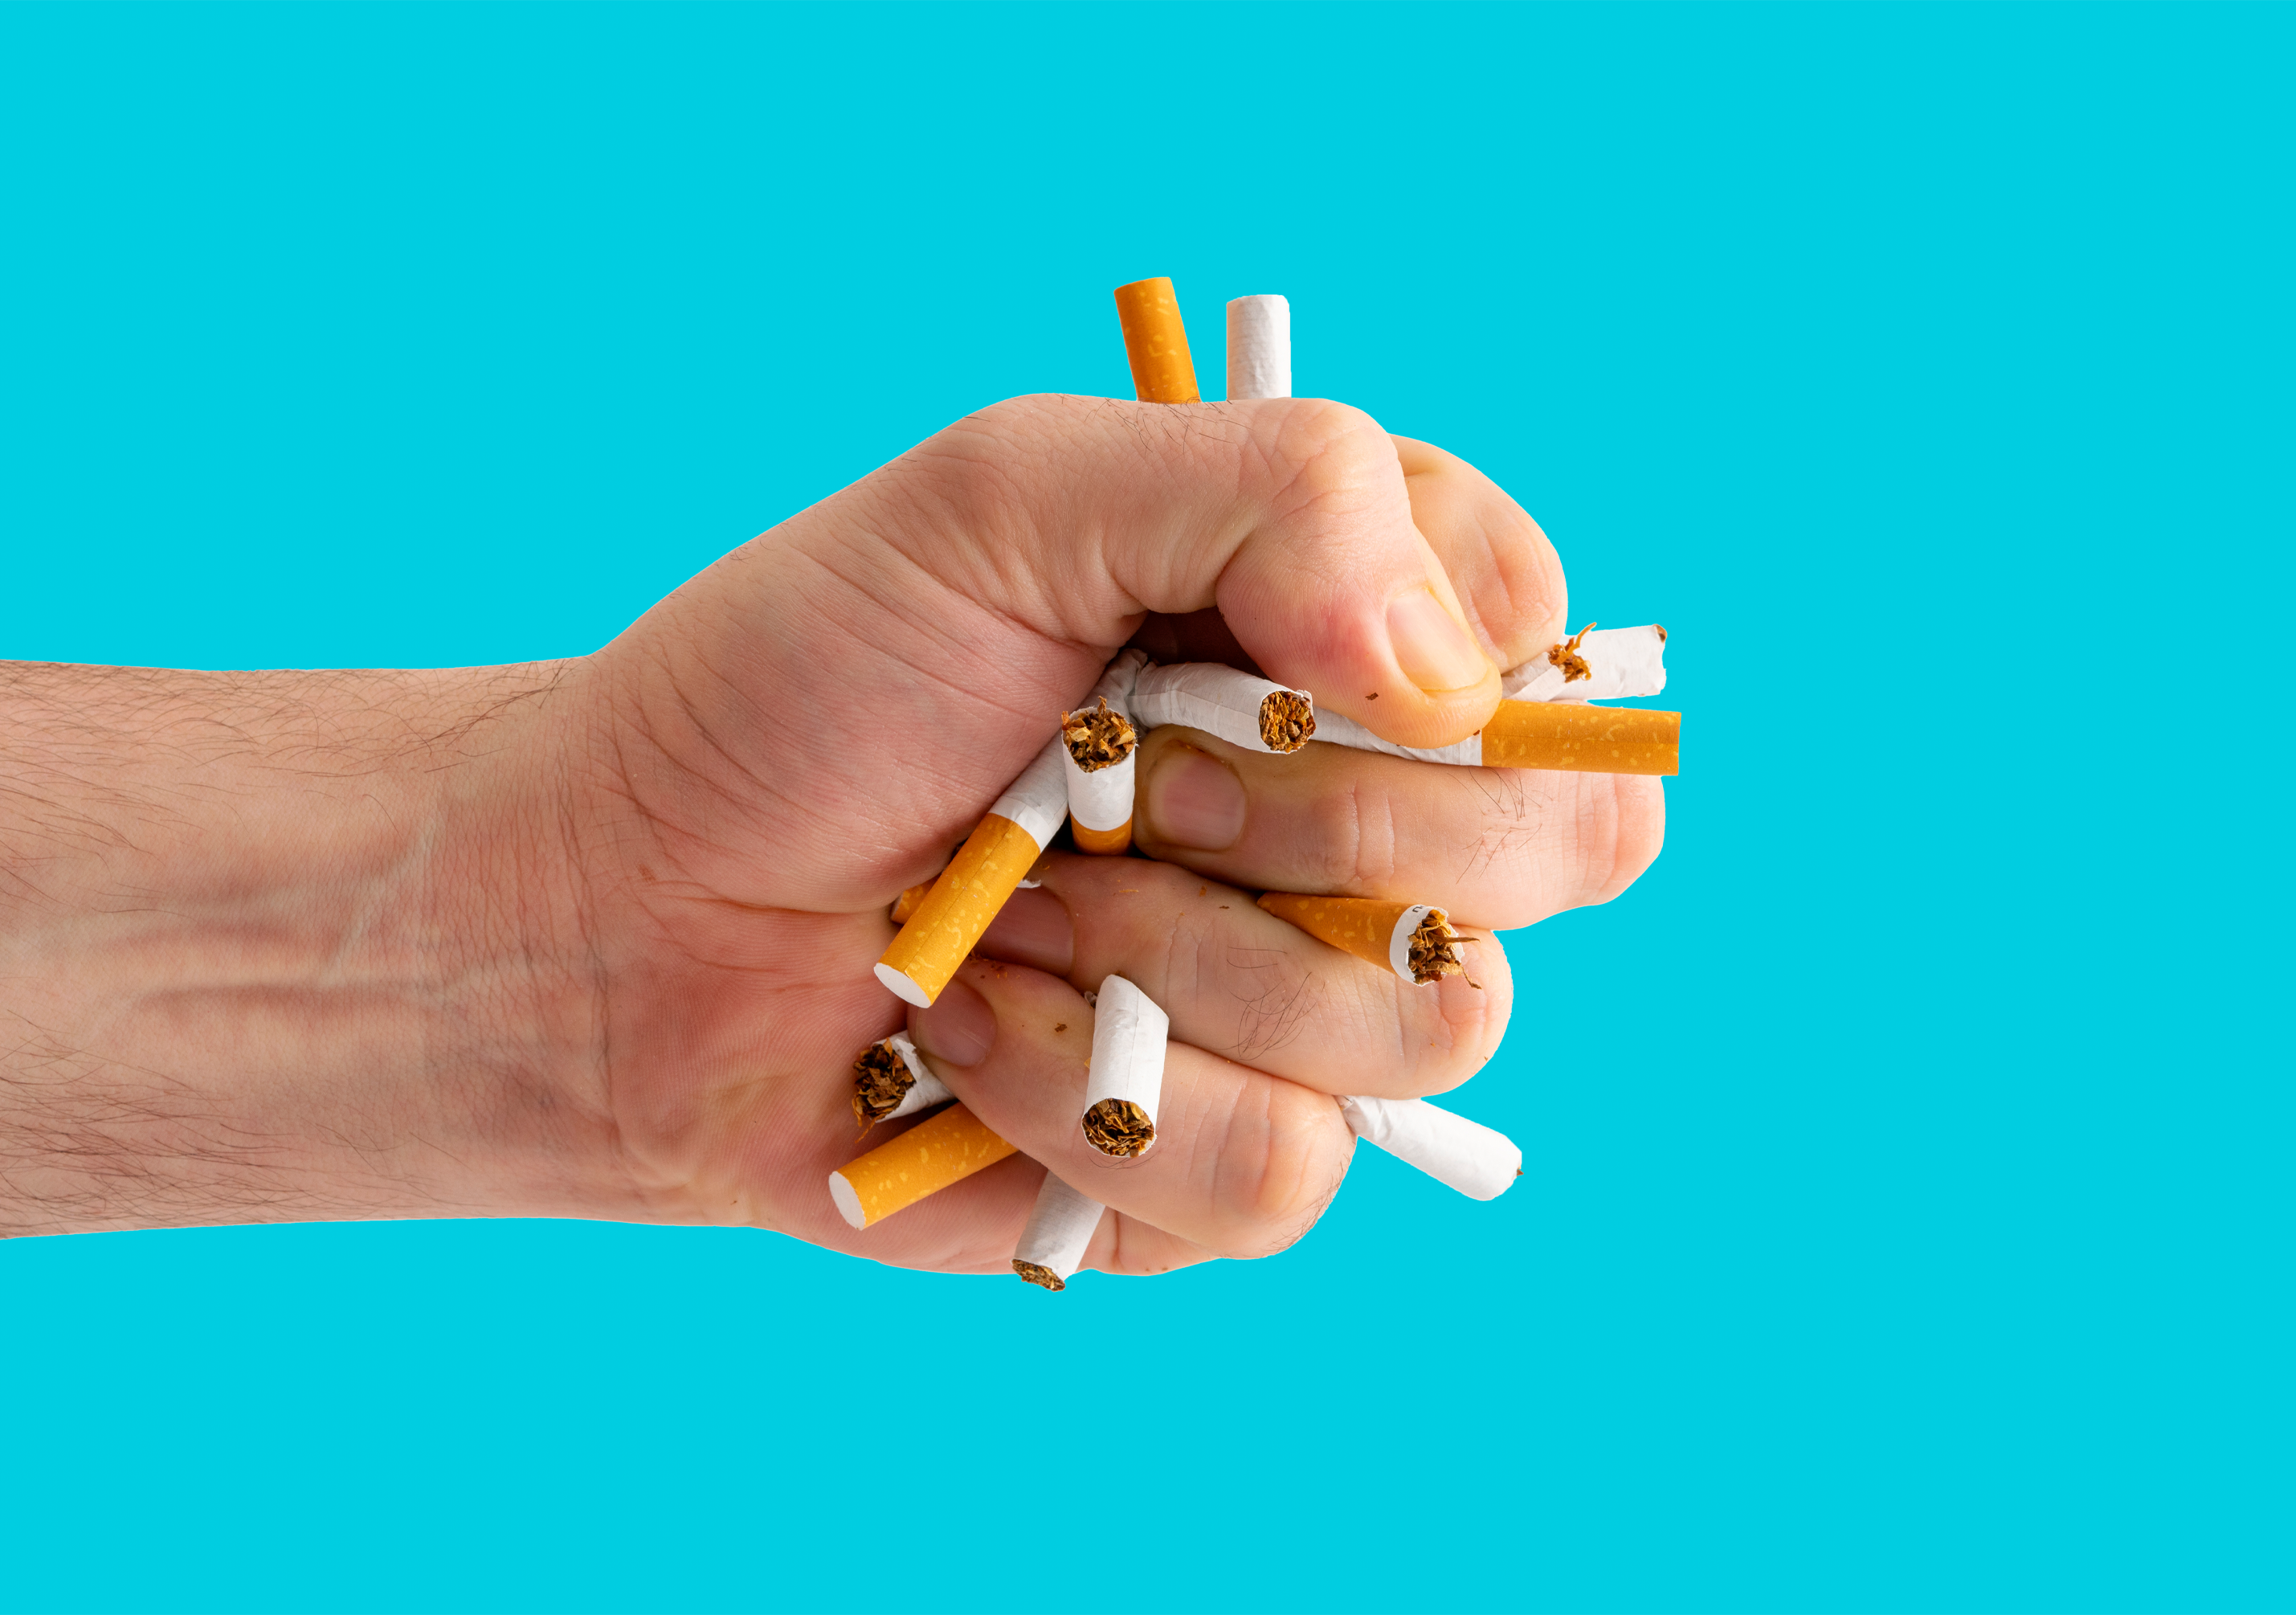 Hand clutching cigarettes in a closed fist